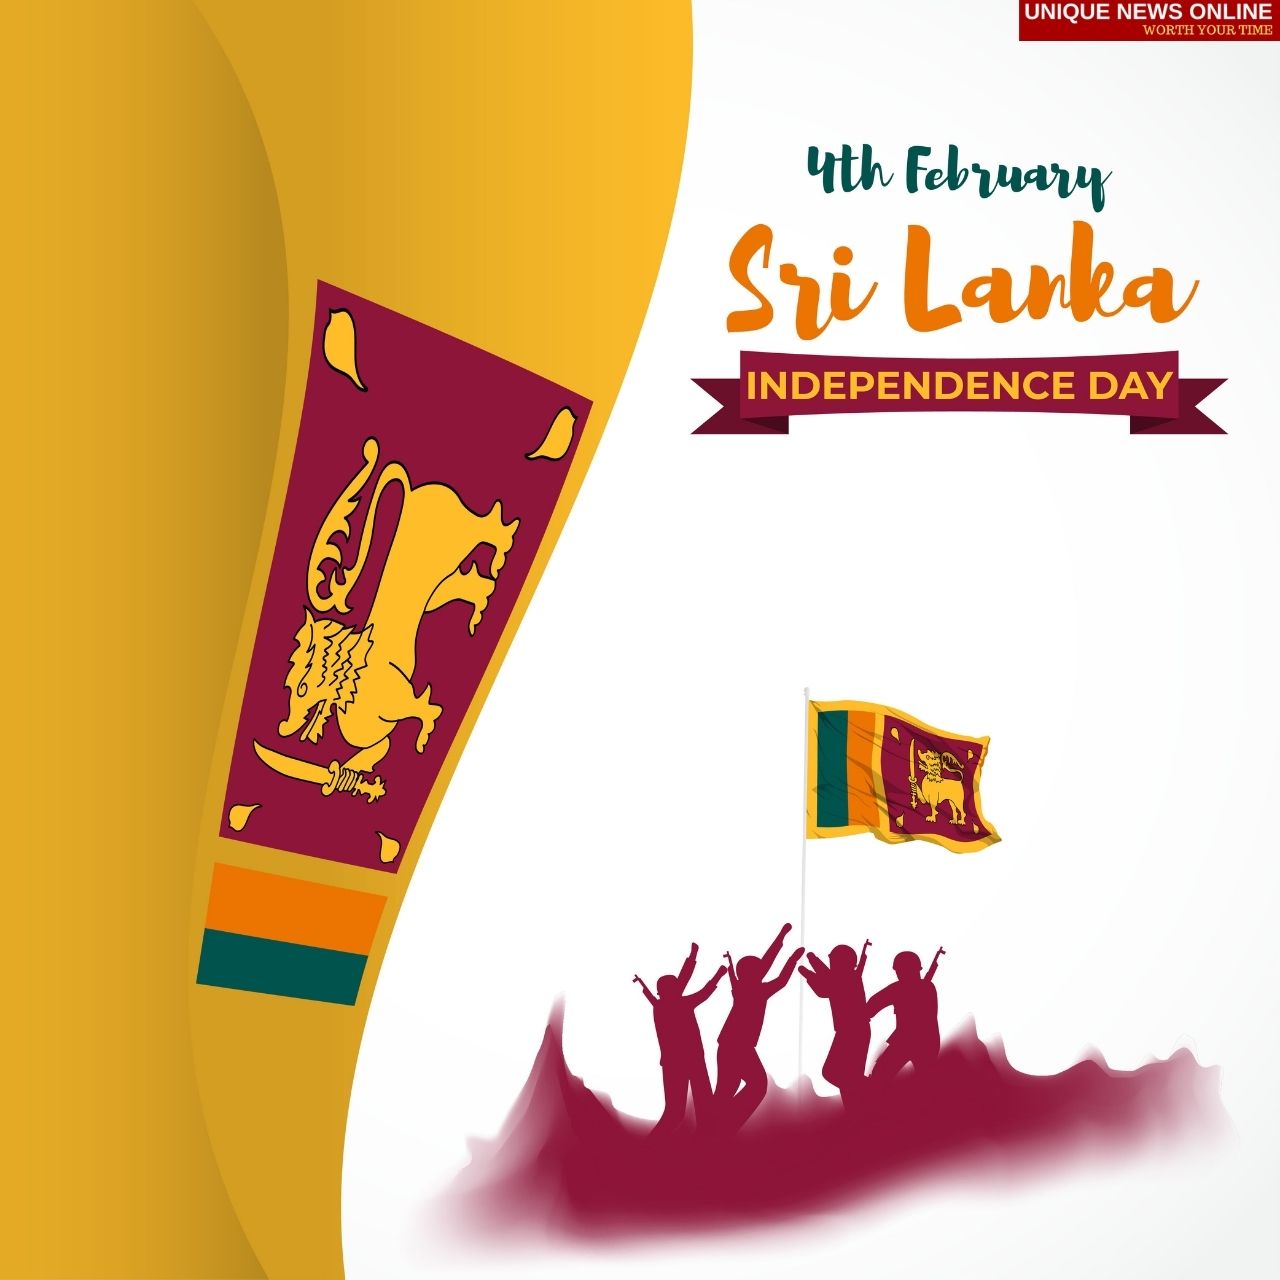 Sri Lanka Independence Day 2022 Wishes, Greetings, Messages, HD Images